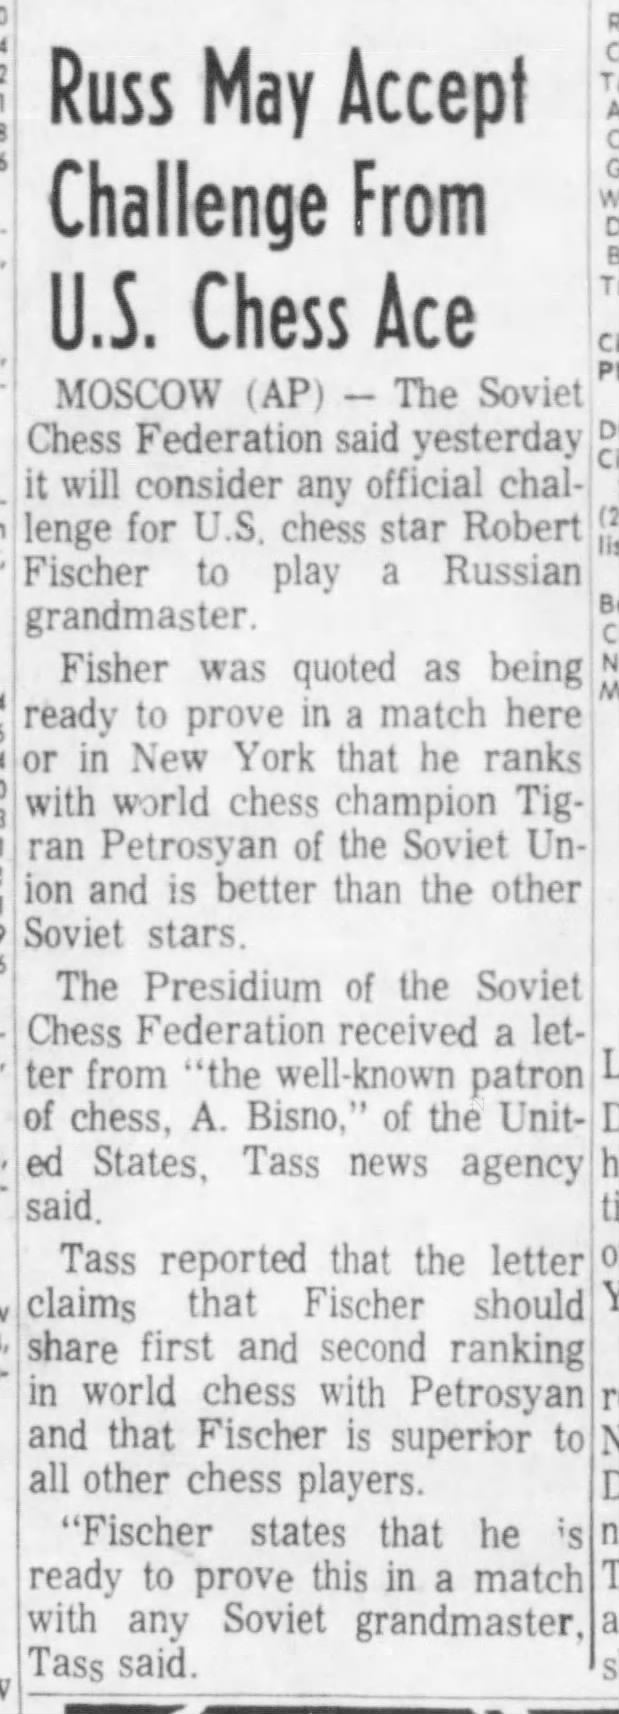 Russ May Accept Challenge From U.S. Chess Ace